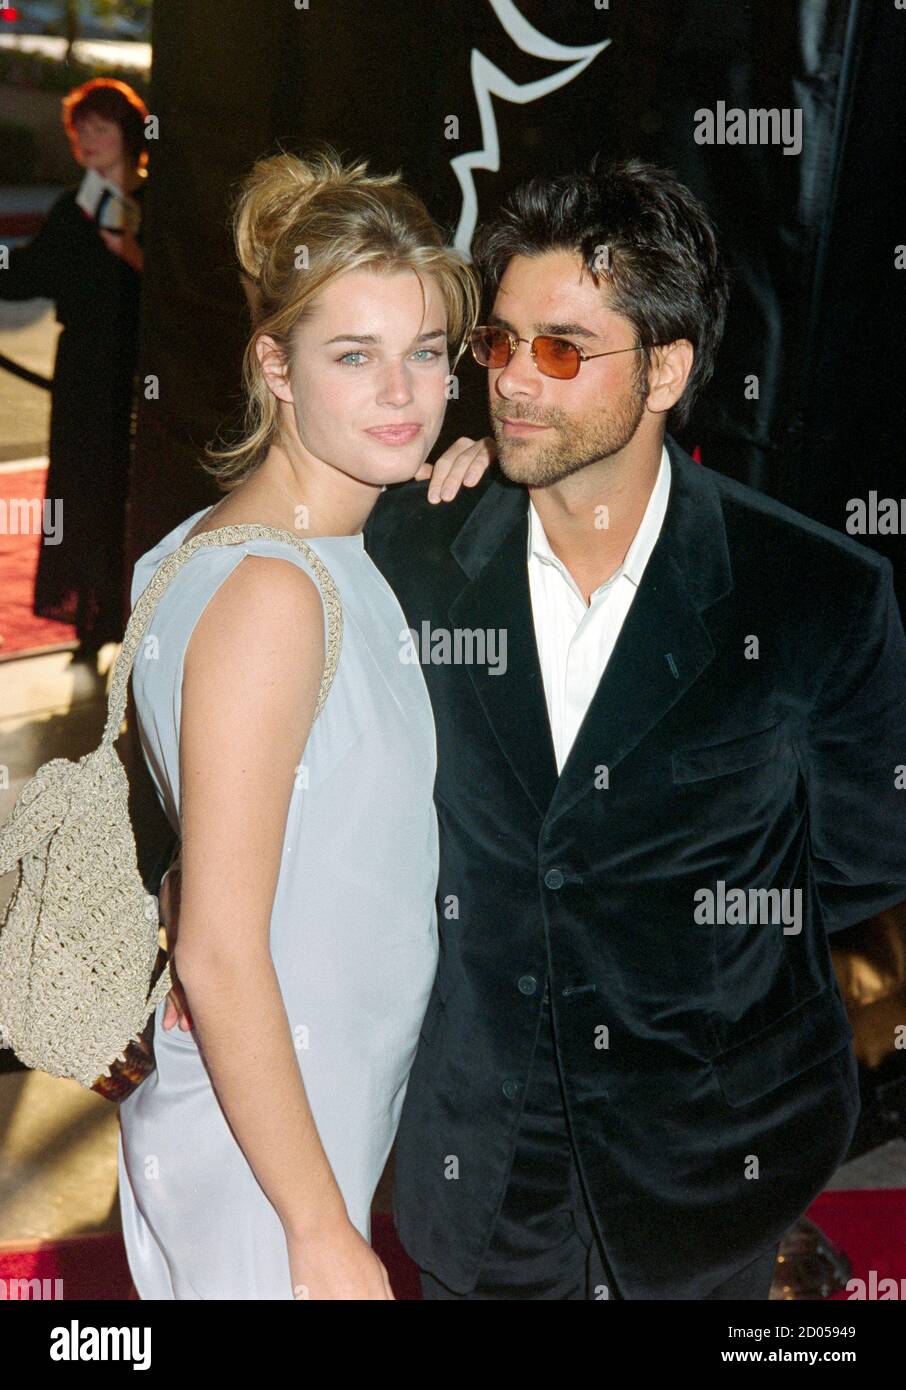 ARCHIVE: LOS ANGELES, CA. March 24, 1995: Actor John Stamos & actress wife Rebecca Romijn at the Benefit Performance of "Beauty And The Beast" at the Shubert Theatre. File photo © Paul Smith/Featureflash Stock Photo